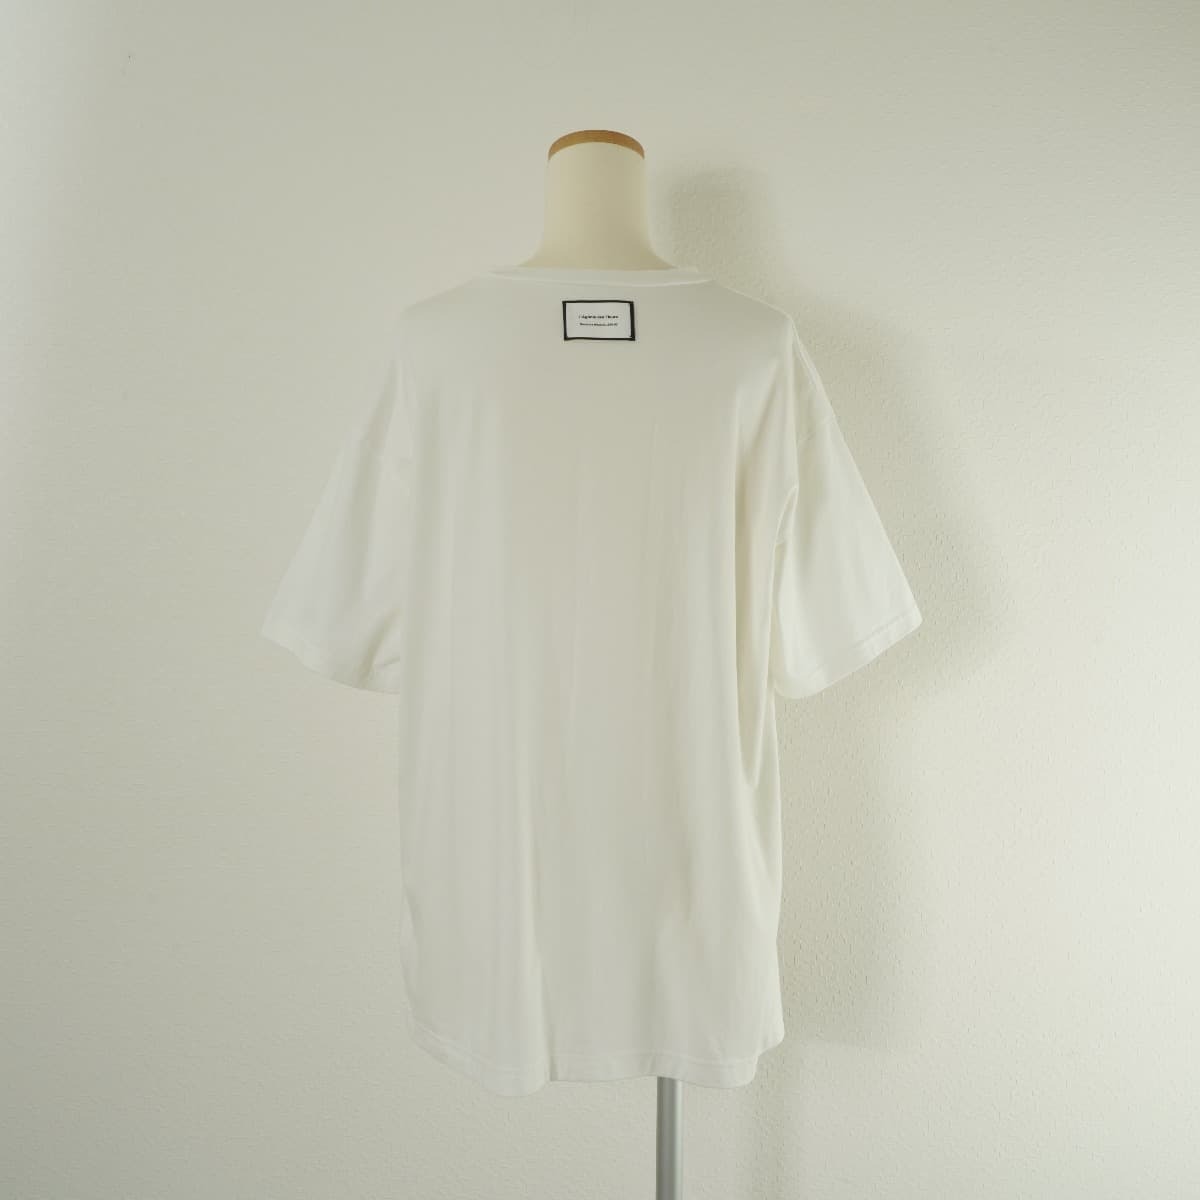  Ame liAMERI × THE MET L´AGONIE DES FLEURS TEE T-shirt short sleeves cut and sewn tops white collaboration vase 